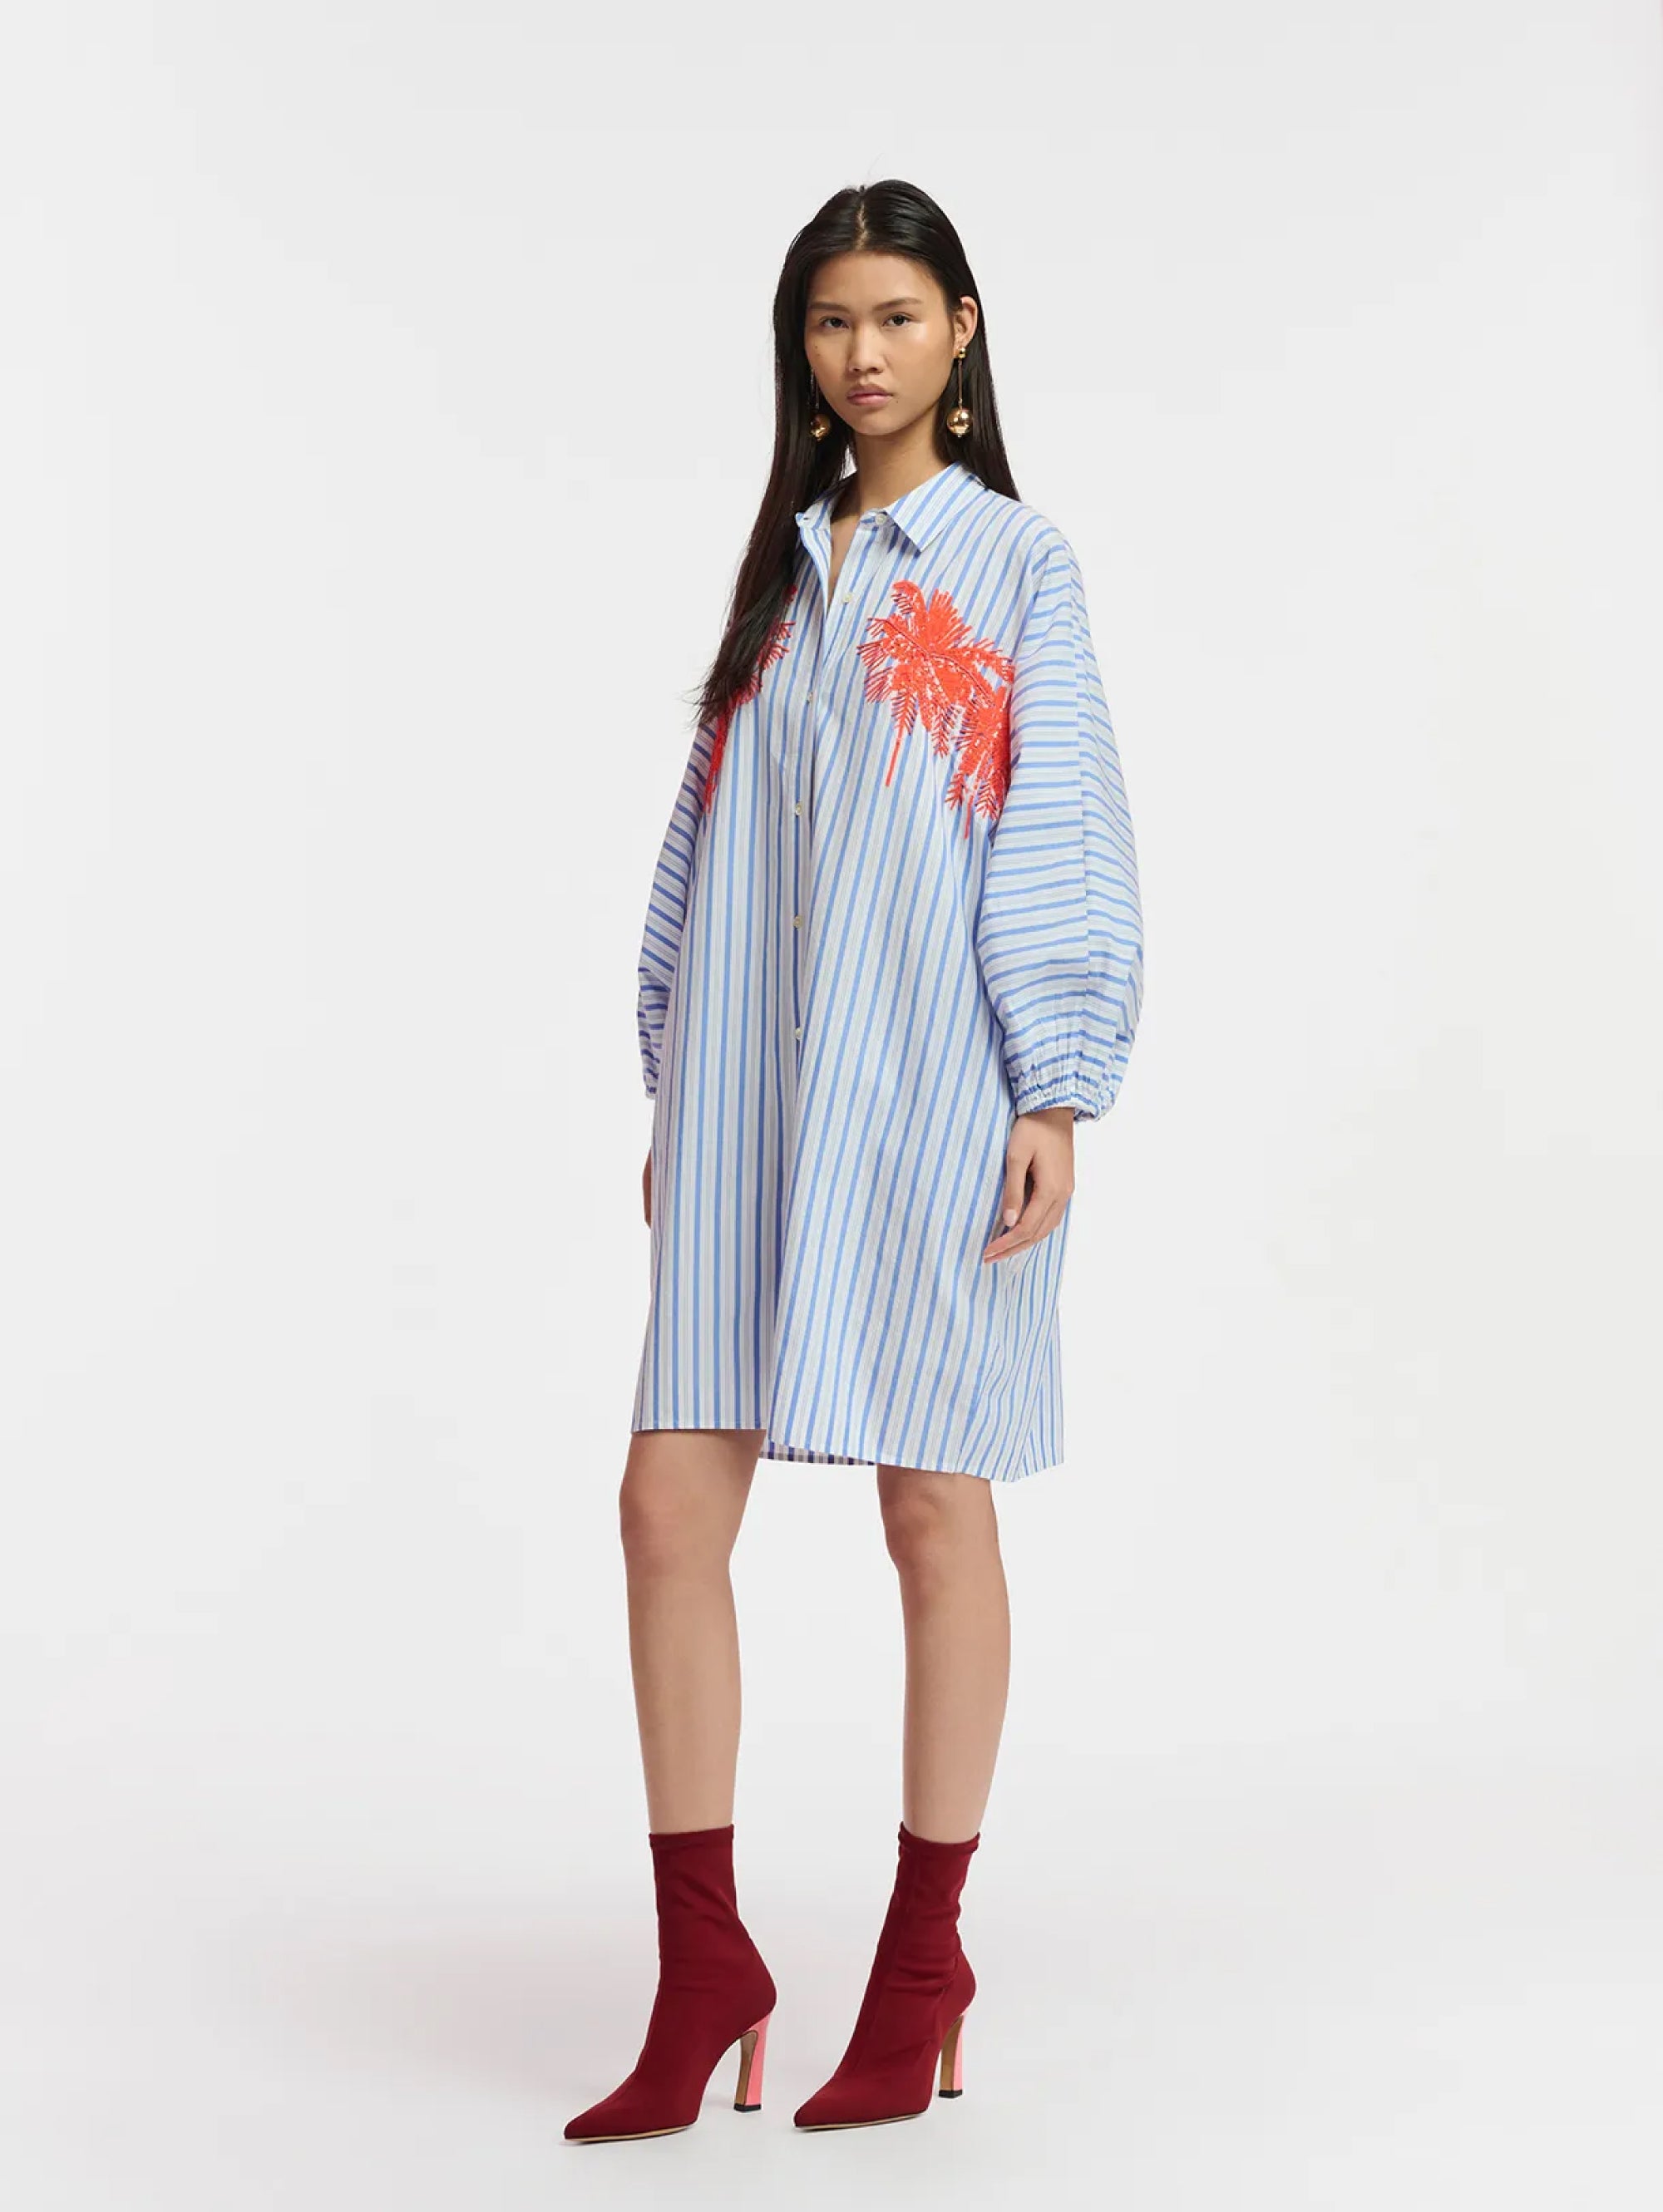 Striped Shirt Dress with White/Blue Embroidery